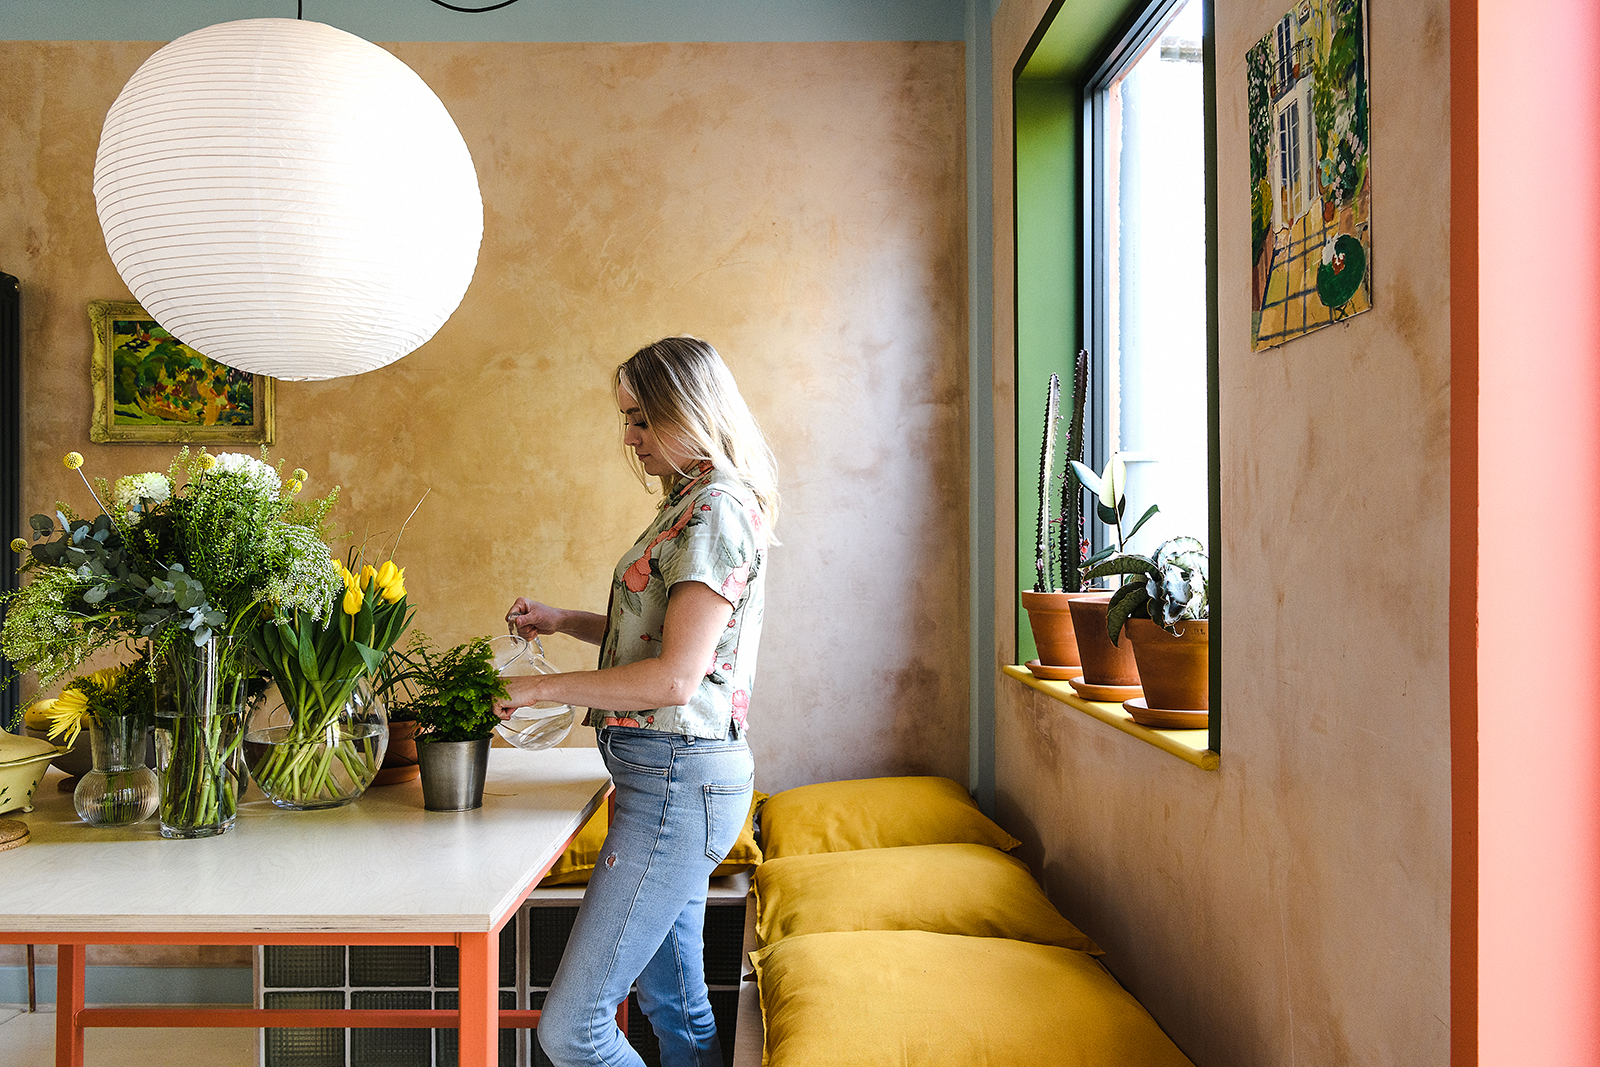 Kitchen of the Week: A Waste-Conscious Remodel Inspired by the Colors at Burning Man